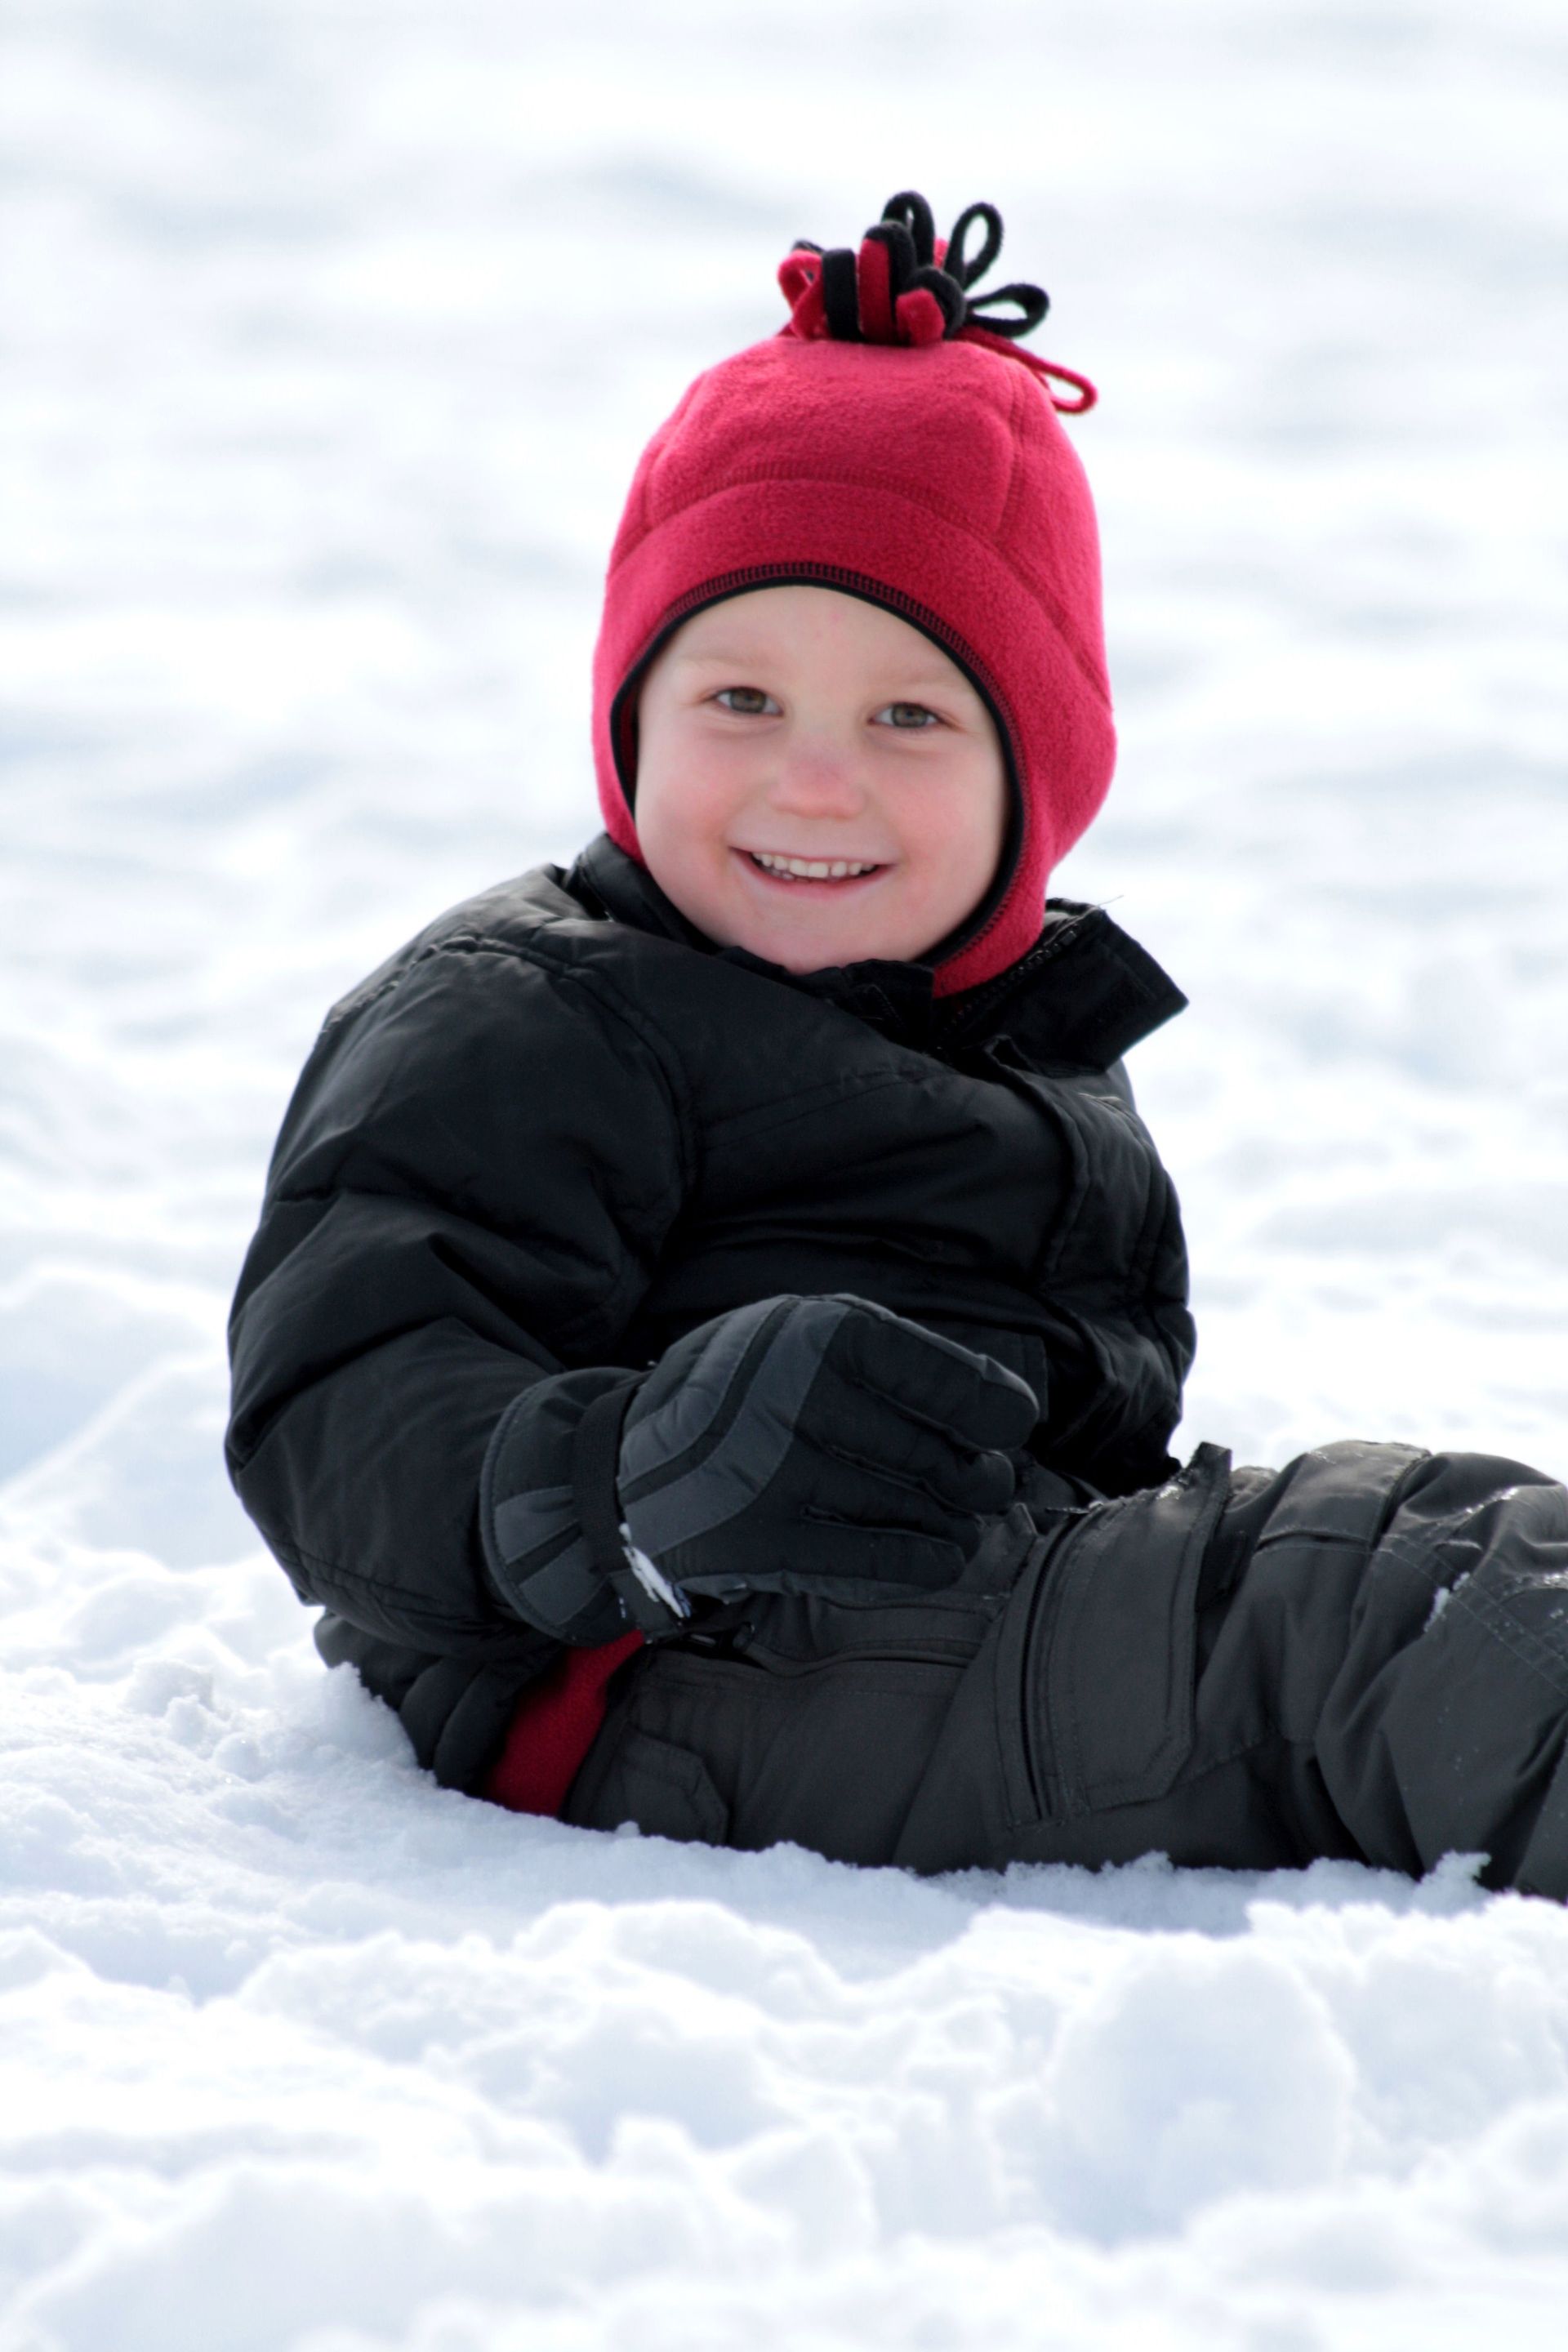 A little boy in a red hat plays in the snow.